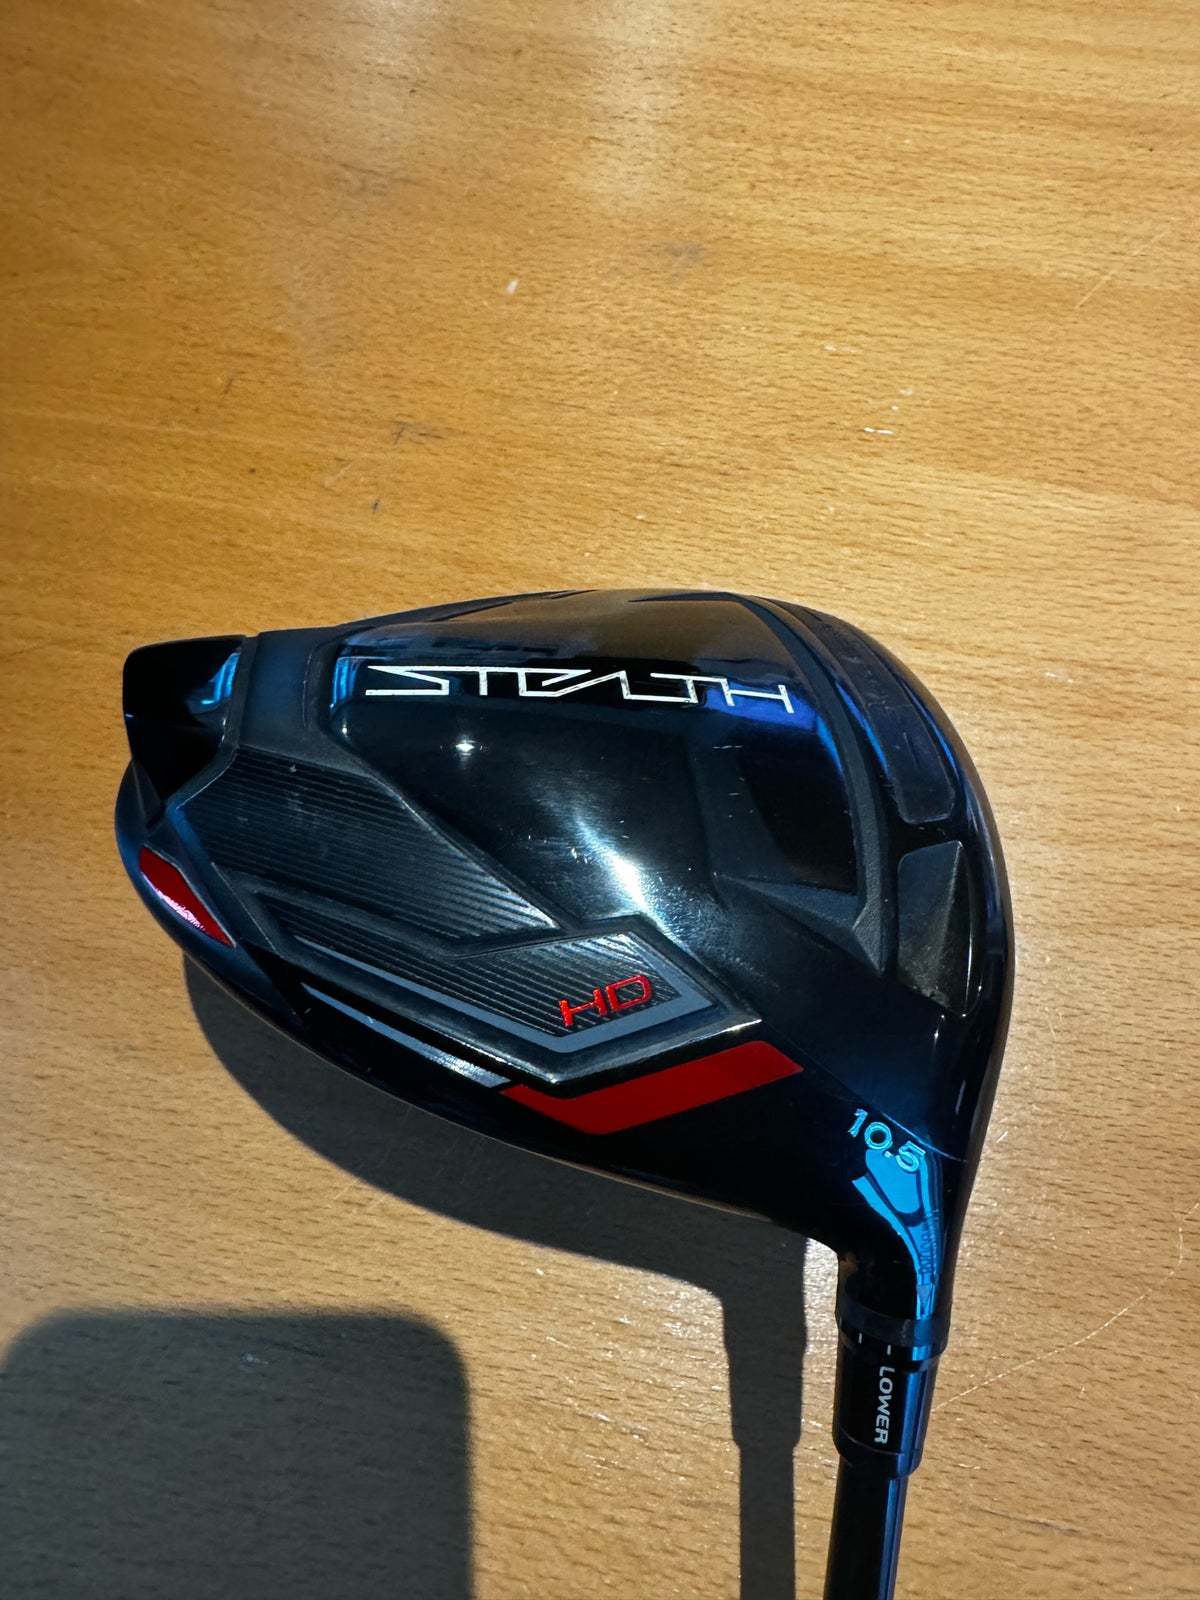 Driver, Taylormade Stealth